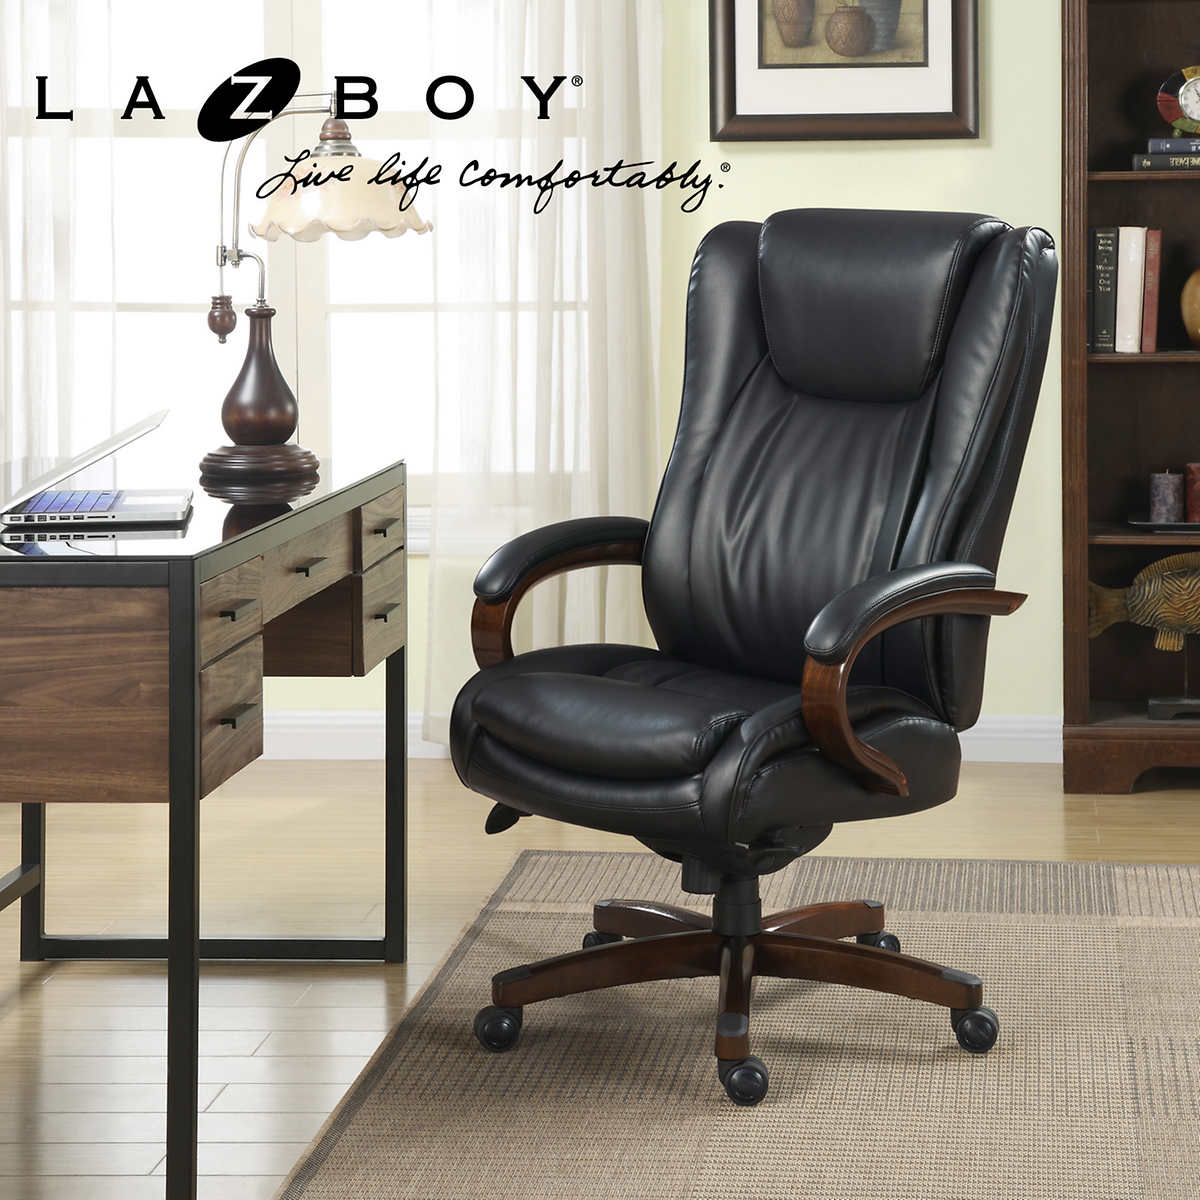 La Z Boy Big Tall Executive Leather, Executive Office Chairs Leather Wood